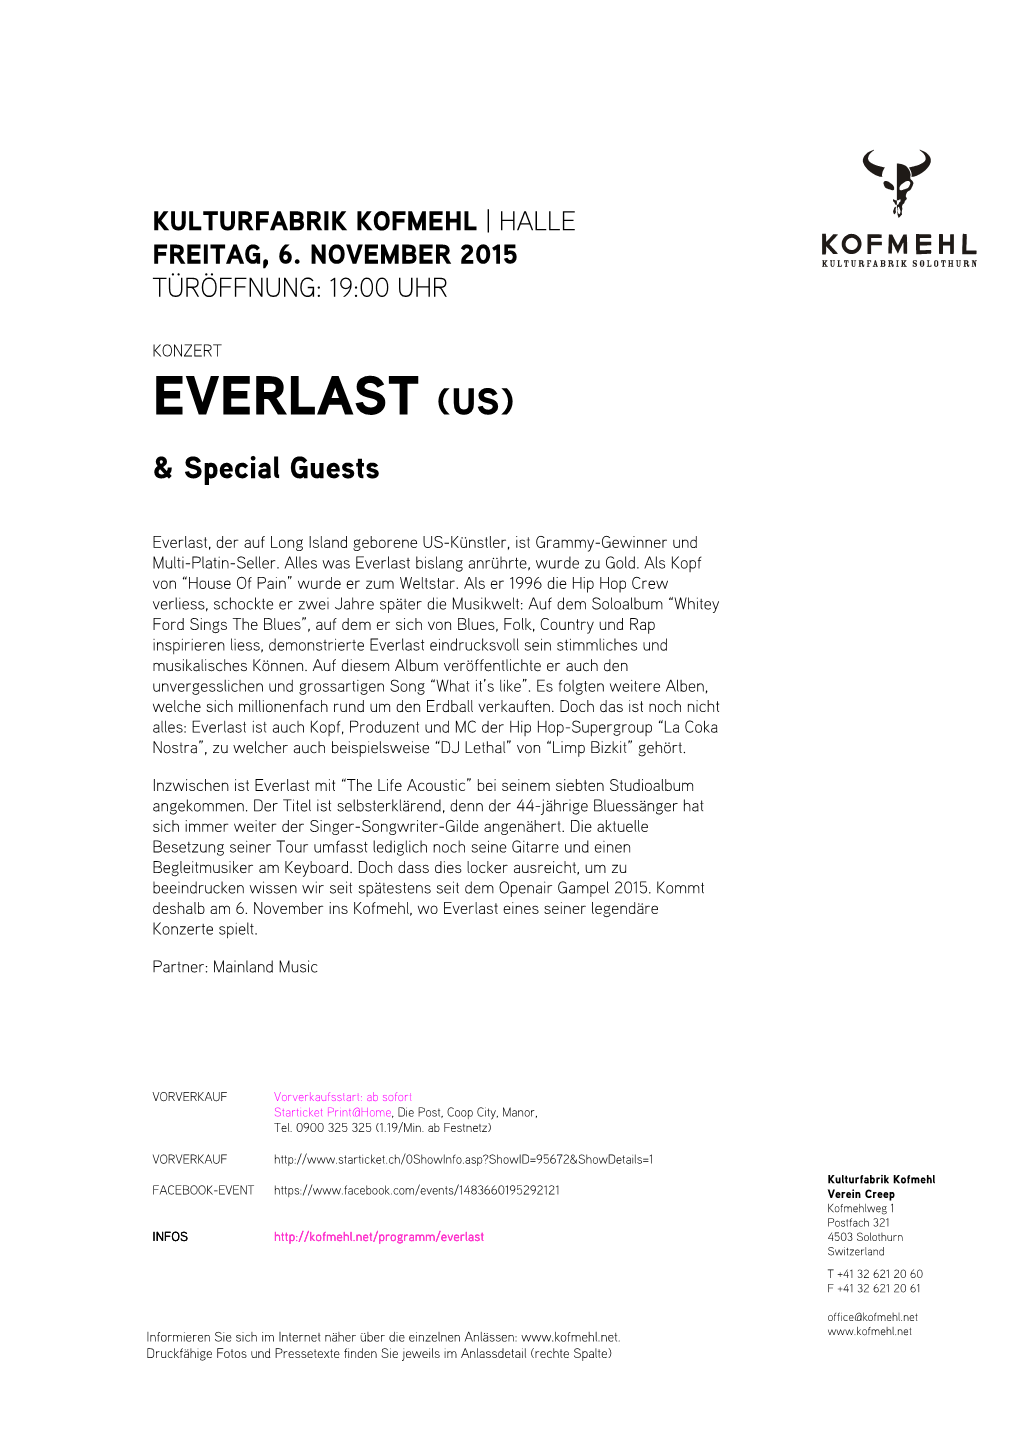 EVERLAST (US) & Special Guests